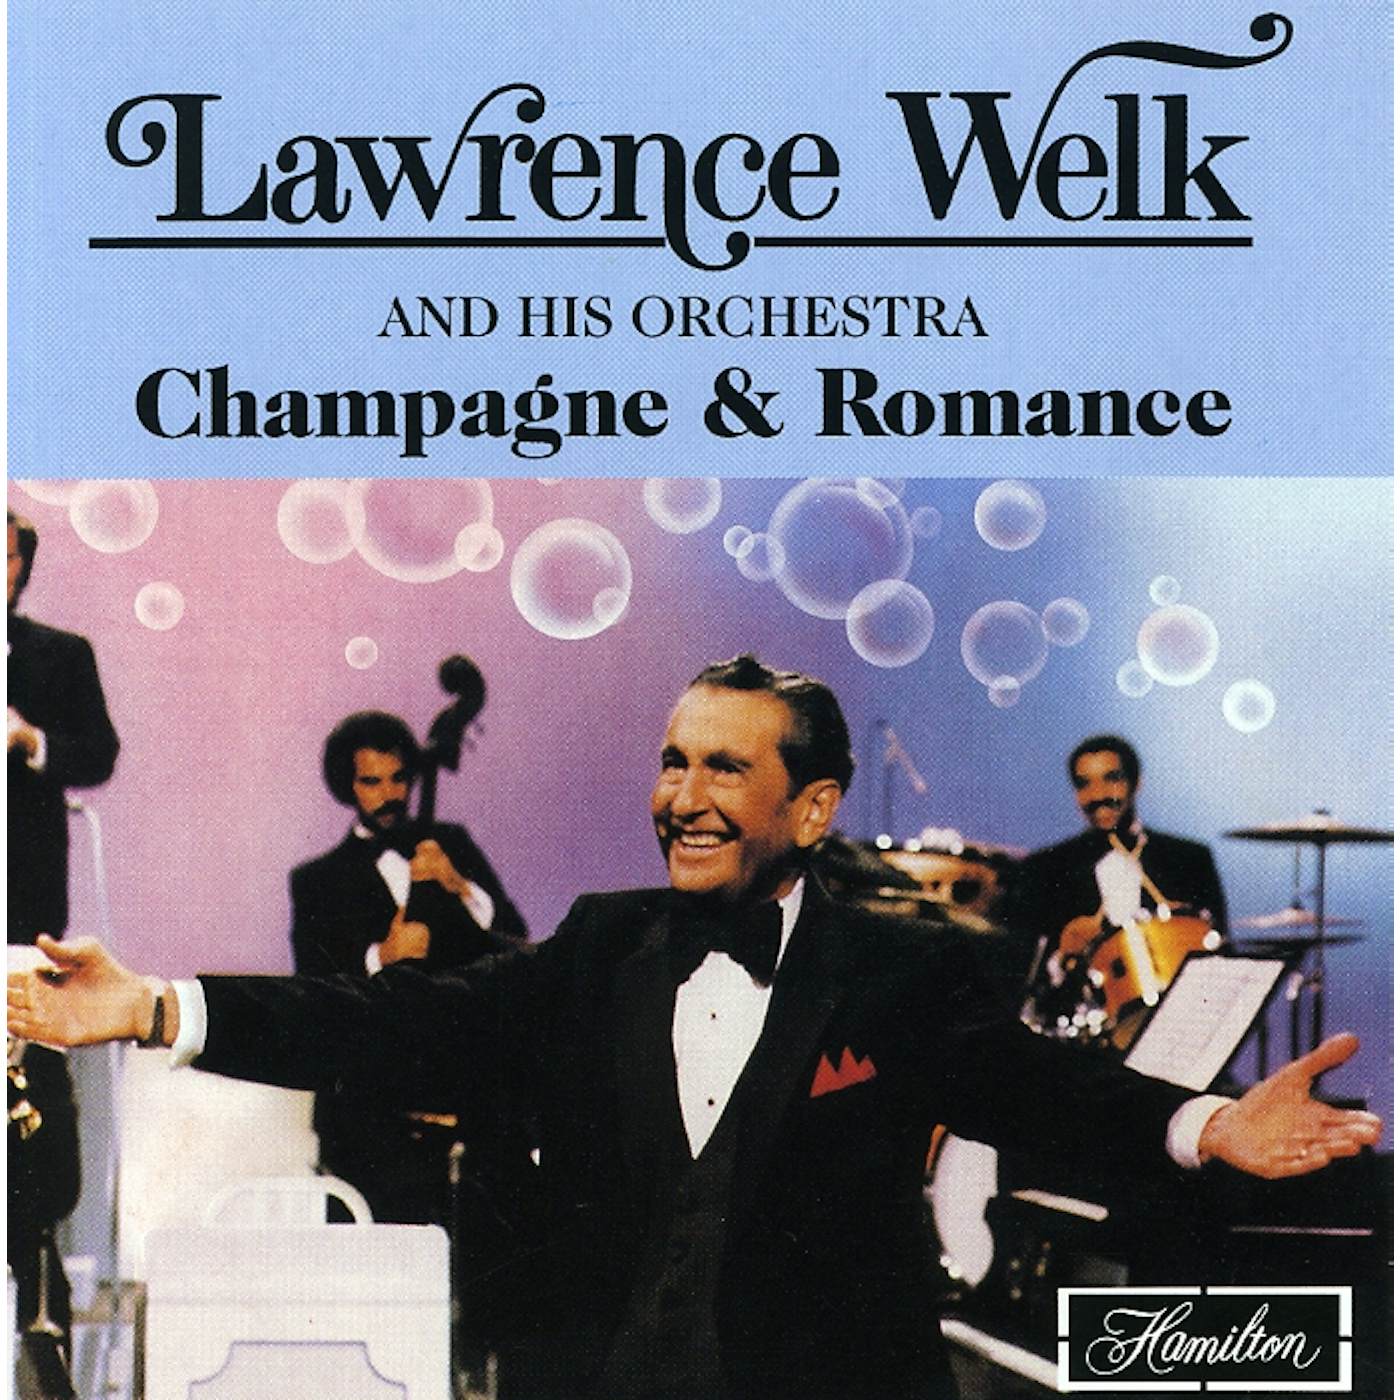 Lawrence Welk CHAMPAGNE & ROMANCE CD